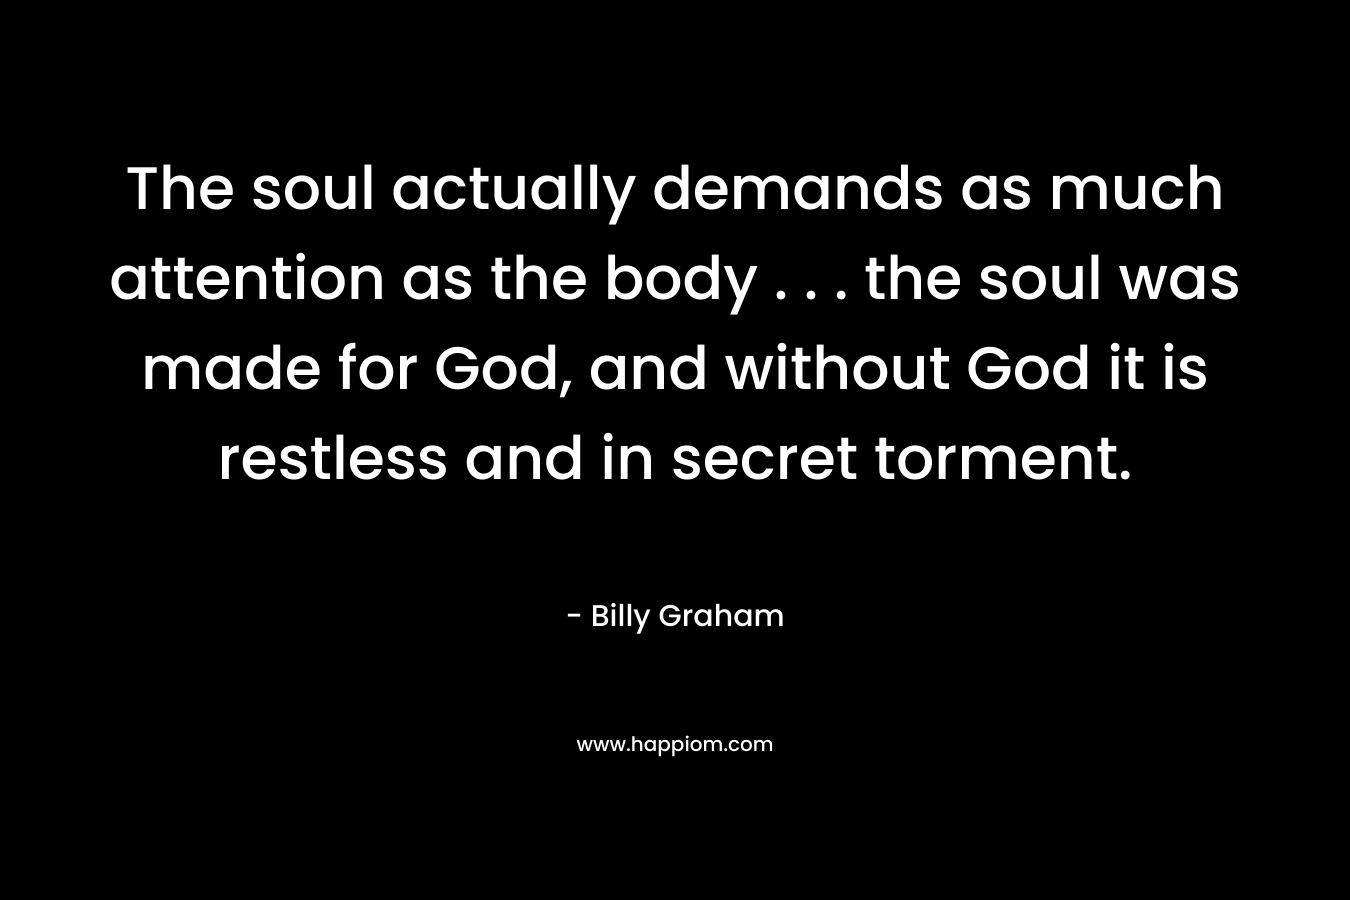 The soul actually demands as much attention as the body . . . the soul was made for God, and without God it is restless and in secret torment.